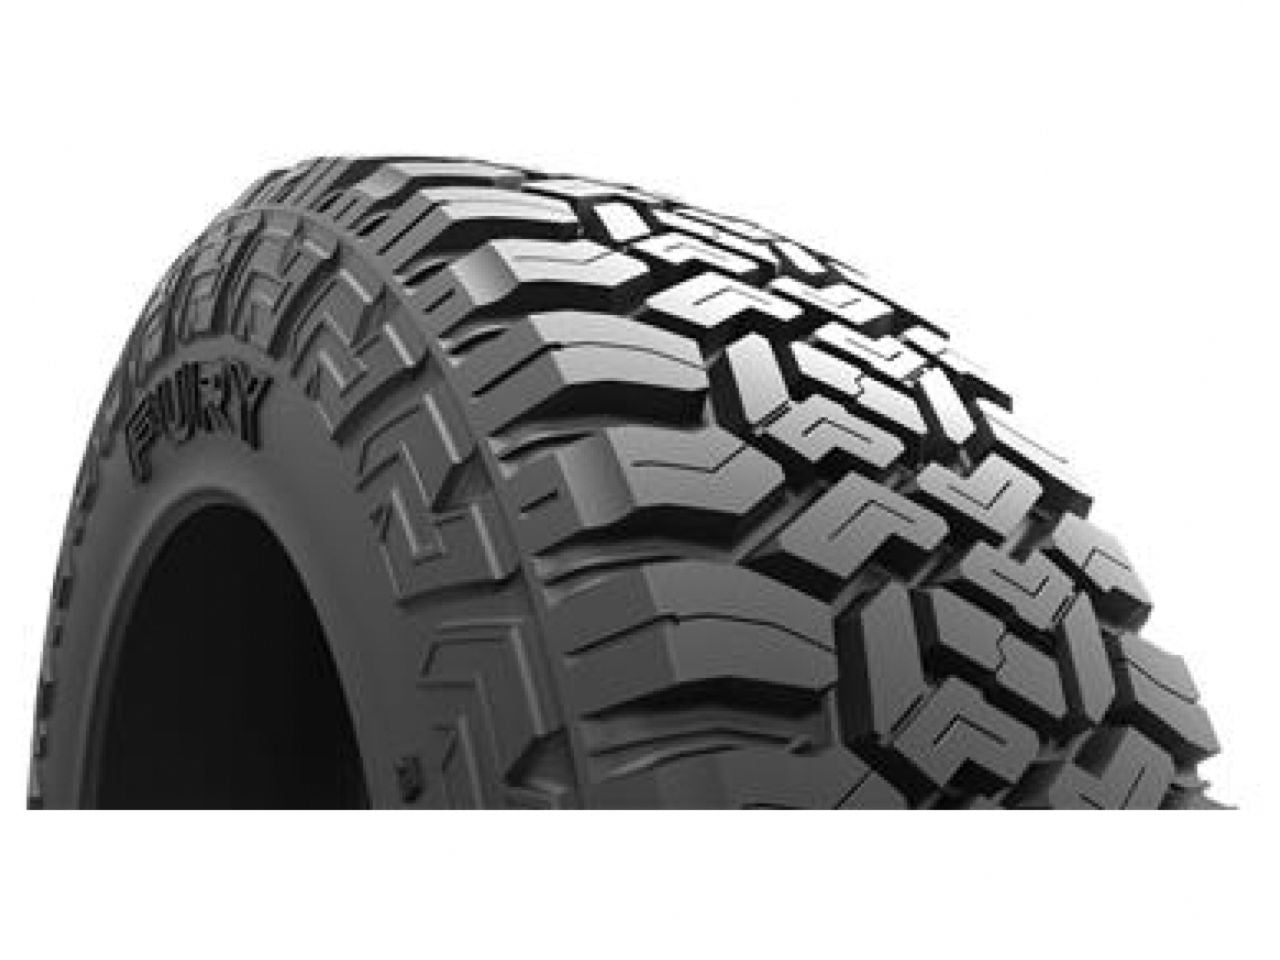 Fury Off Road 33x12.50R18 Tire, Country Hunter R/T